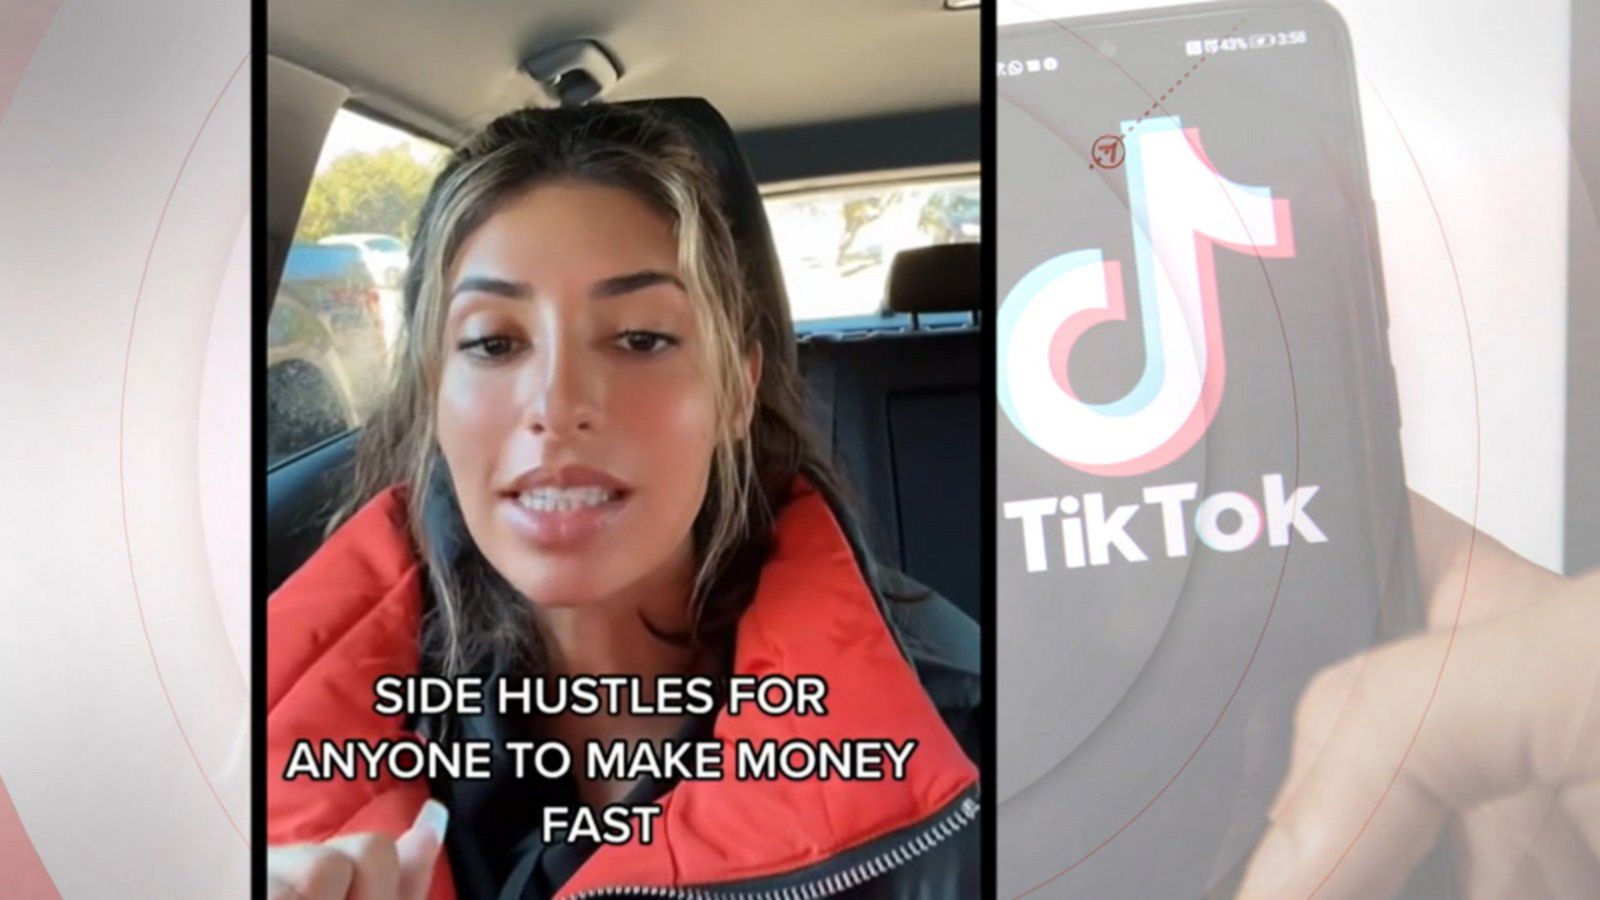 With a rise in layoffs, some are turning to TikTok to share their